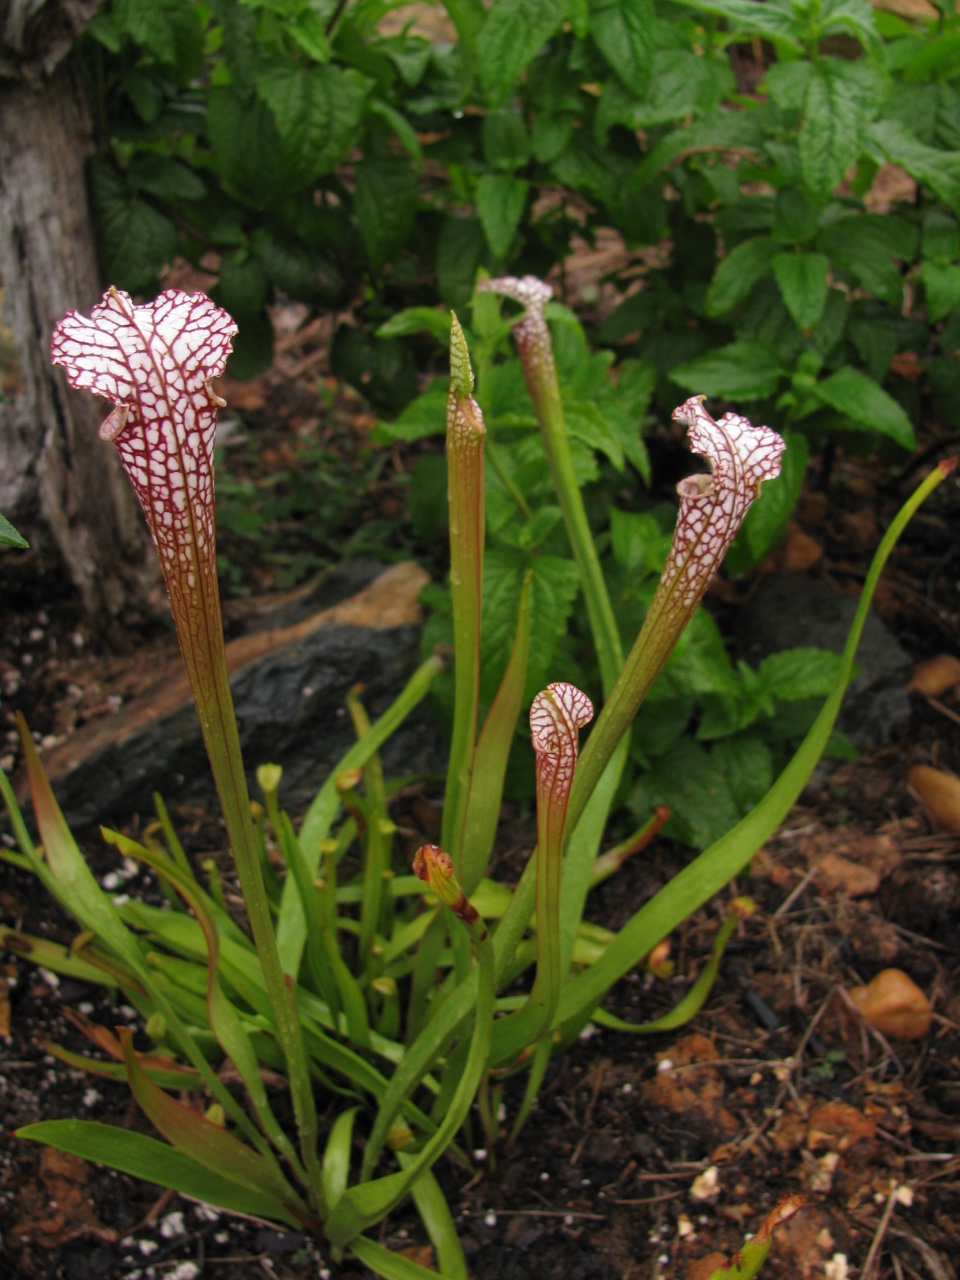 The Scientific Name is Sarracenia leucophylla. You will likely hear them called Whitetop Pitcherplant, Crimson Pitcherplant. This picture shows the Growing in a bog garden of Sarracenia leucophylla